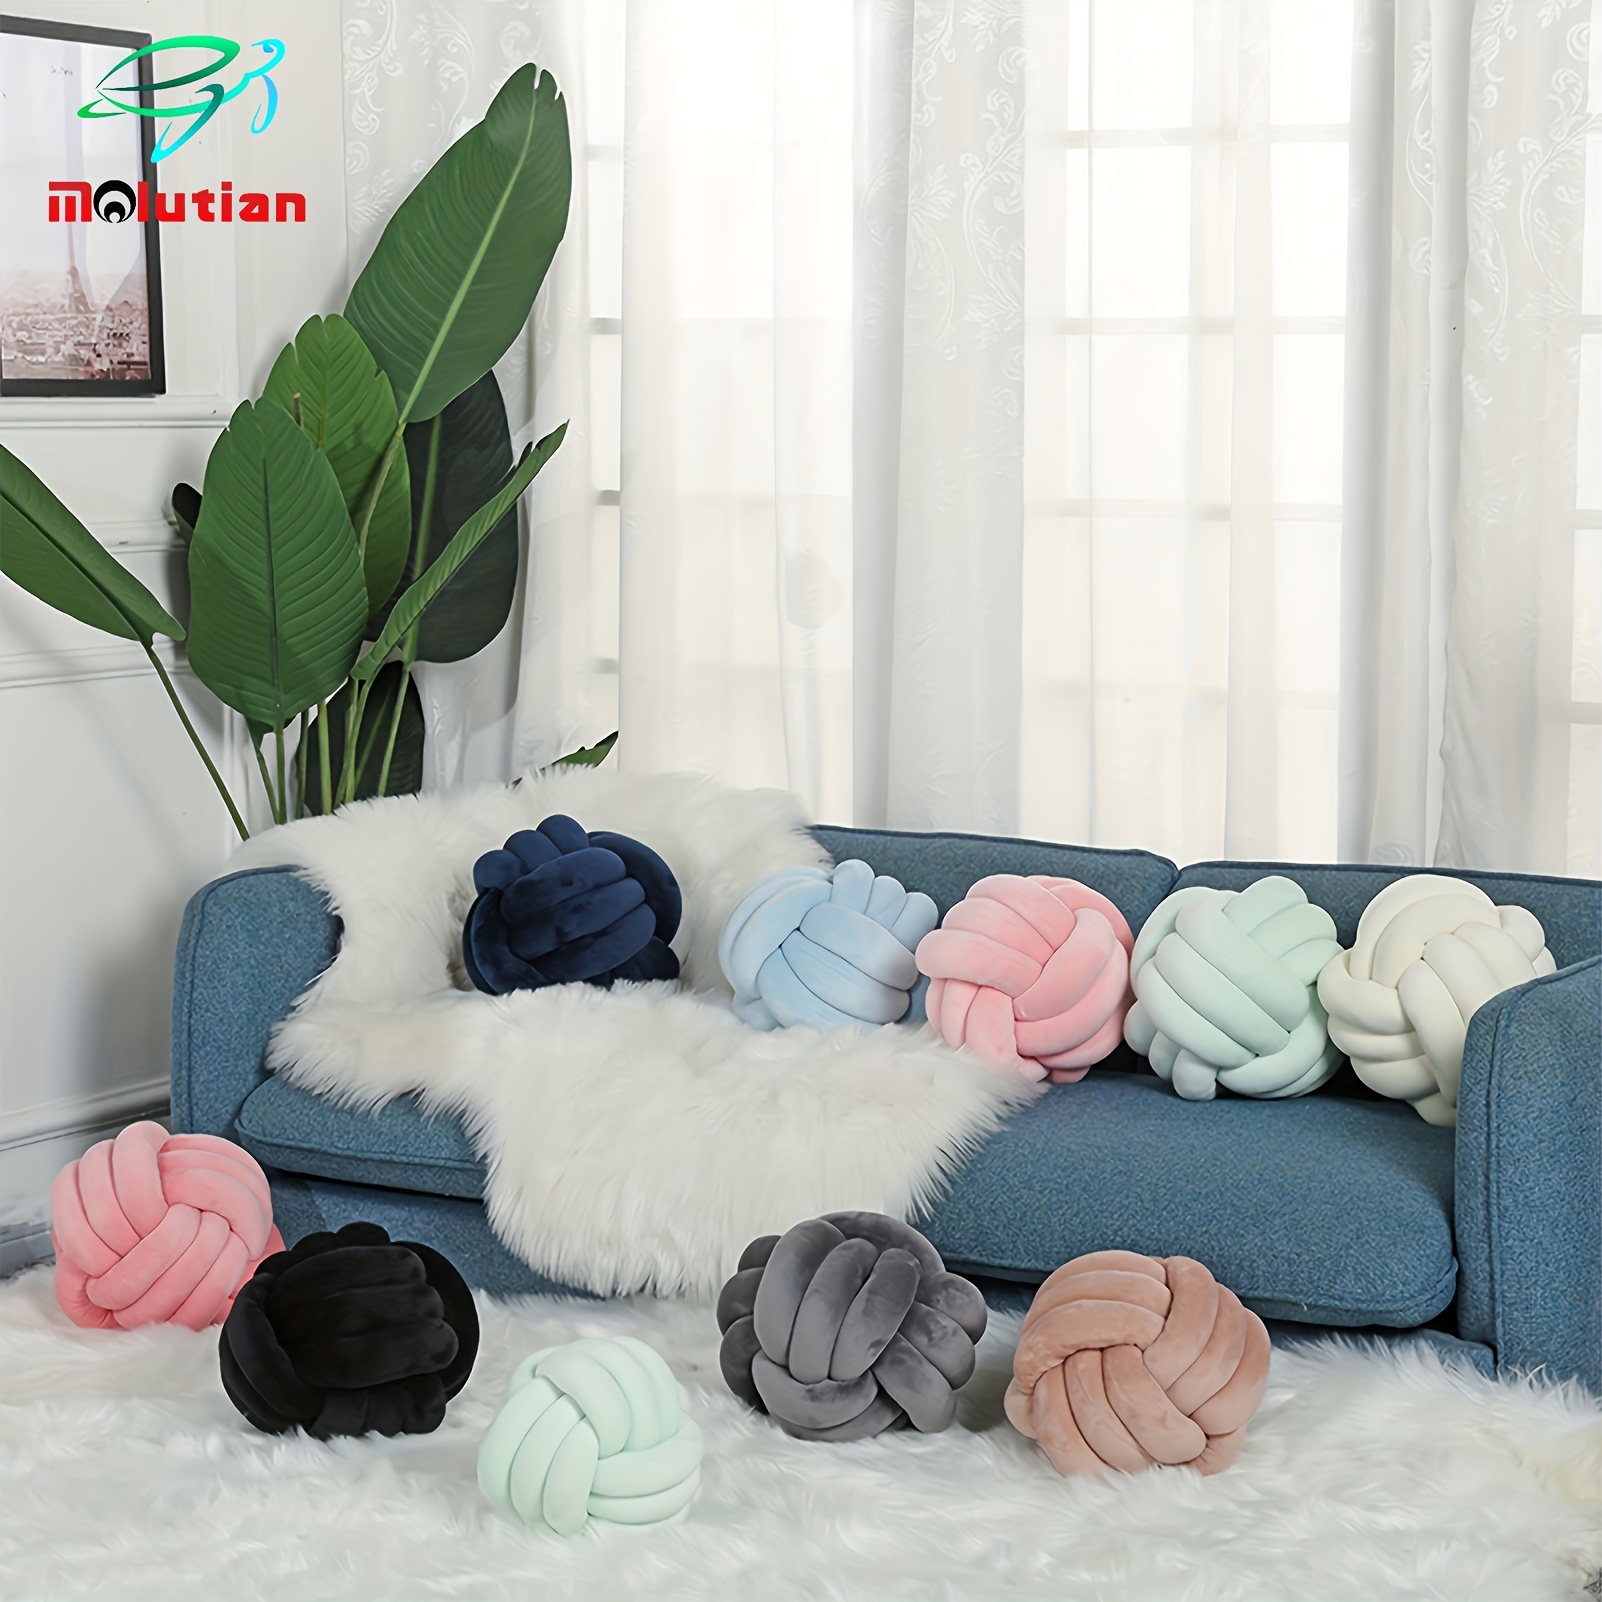 

22cm/8.66in Soft Knot Ball Pillow Couch Cushion Plush Knot Ball Cushion Plush Round Knot Cushion Pillow Unique Home Decor Accent Cushion Perfect Halloween Decor, Thanksgiving, Christmas Gift